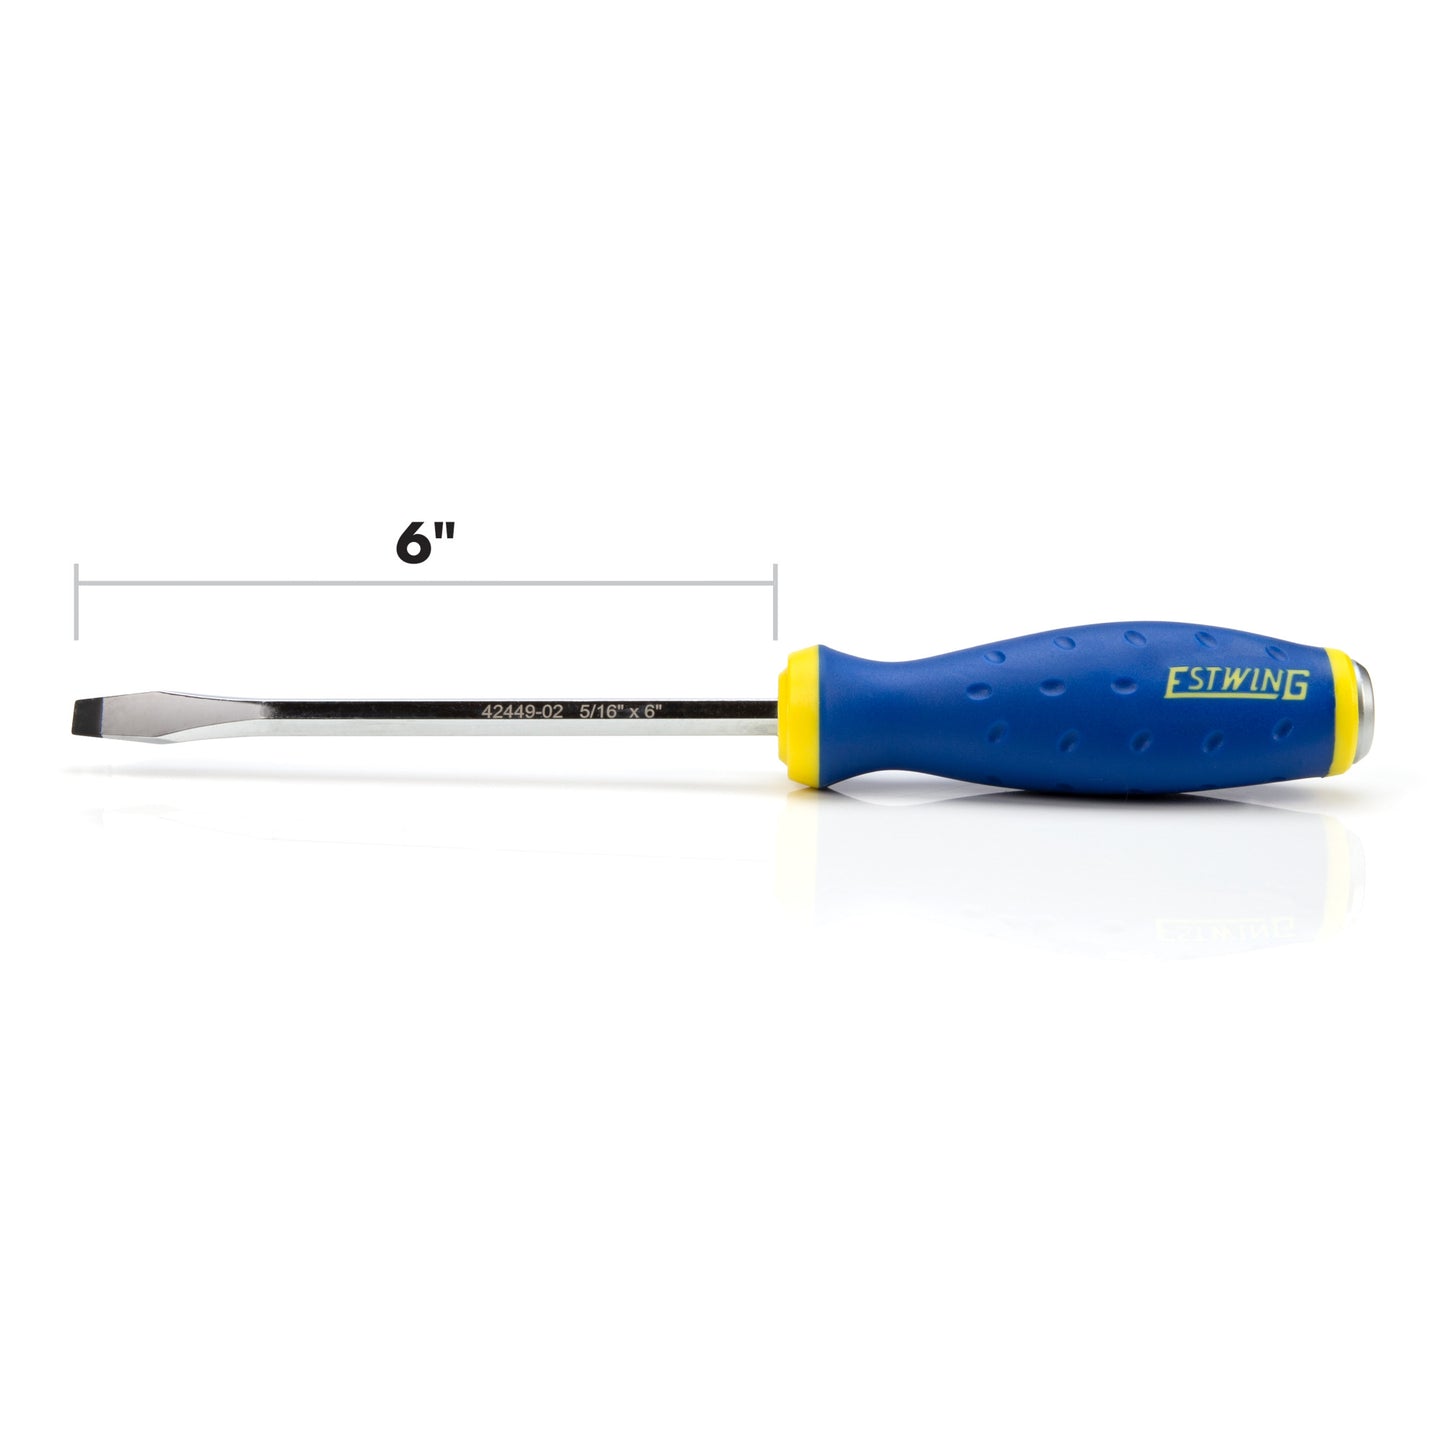 5/16-Inch x 6-Inch Slotted Heavy Duty Hex Shaft Demolition Screwdriver with Magnetic Tip